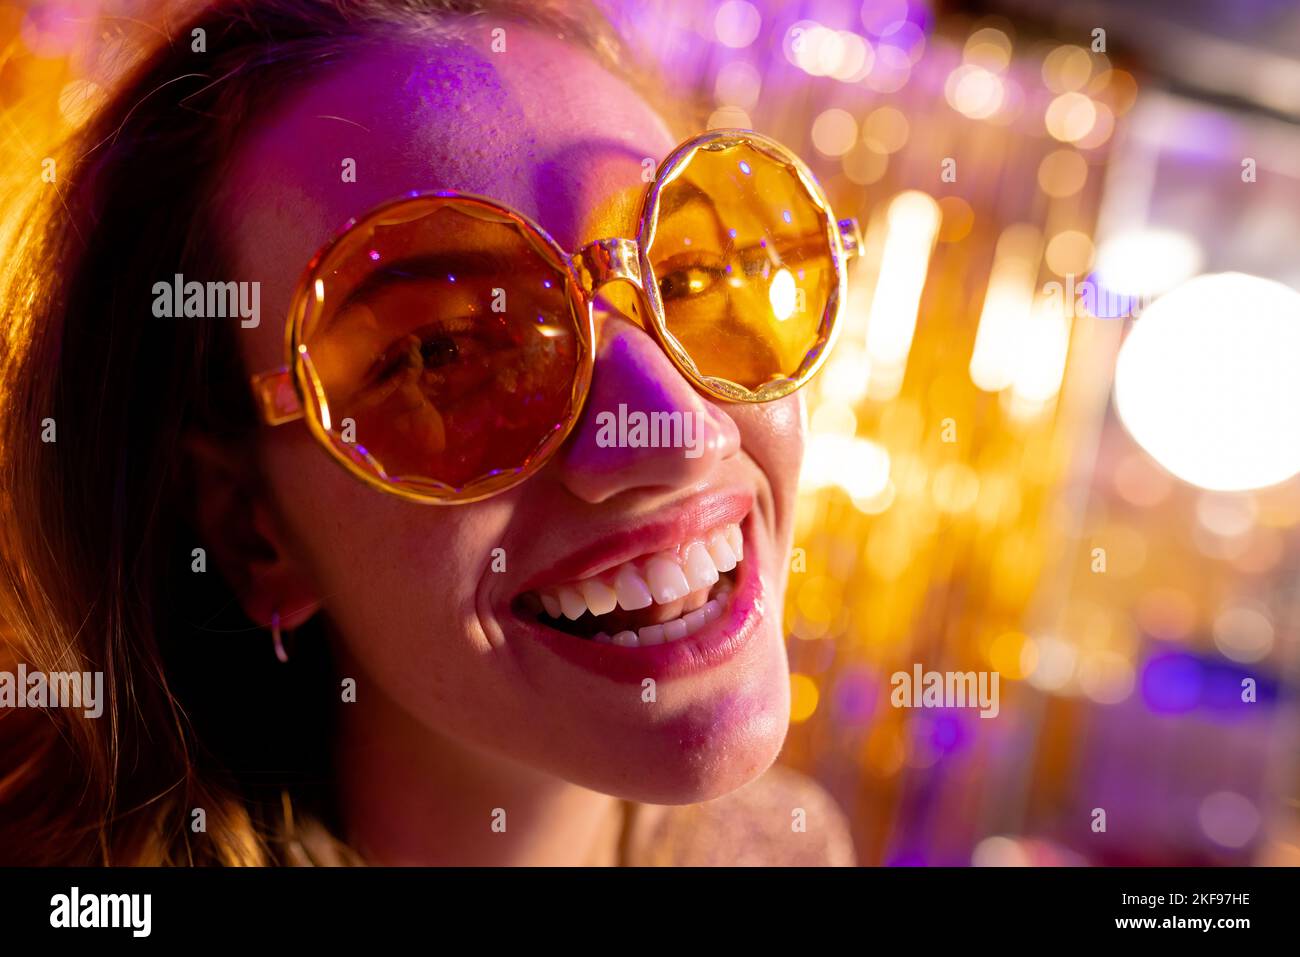 Close up portrait of happy caucasian woman wearing sunglasses smiling to camera at a nightclub. Fun, going out and party concept. Stock Photo